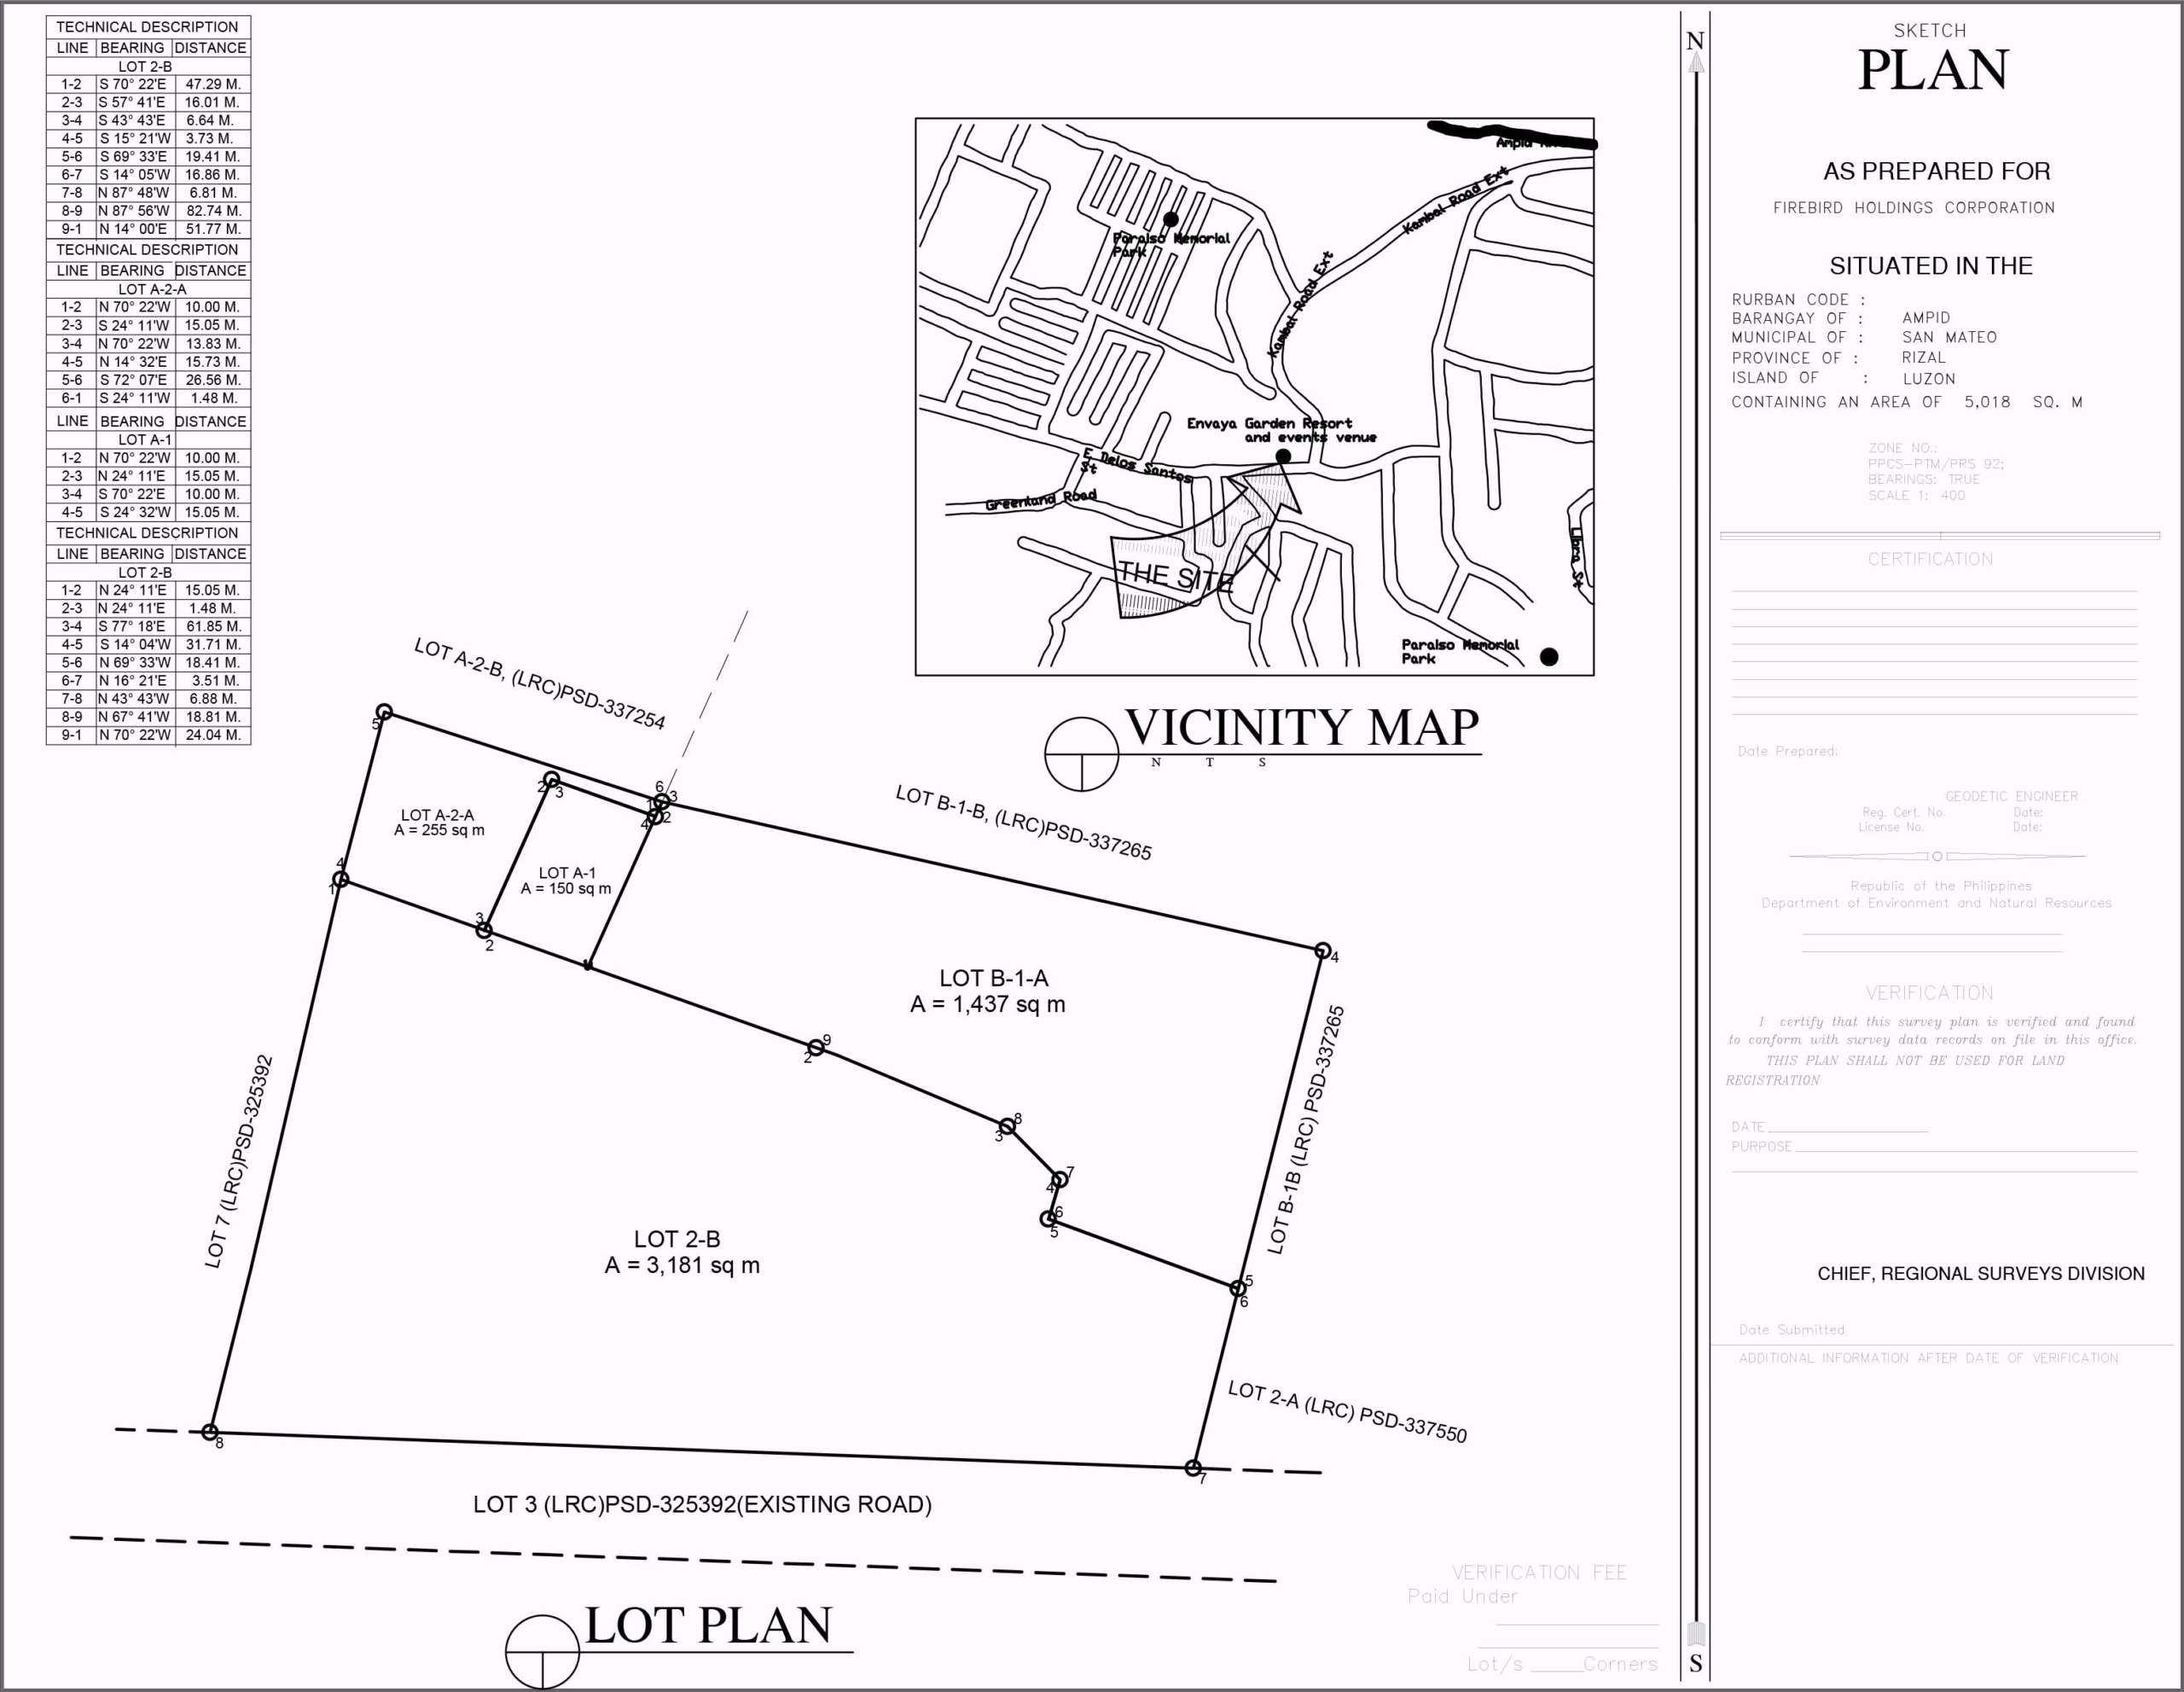 Vacant Lot For Sale Ampid San Mateo Rizal, Vacant Lot For Sale San Mateo, Raw land for sale san mateo rizal, Residential Lot For Sale San Mateo-lotplan